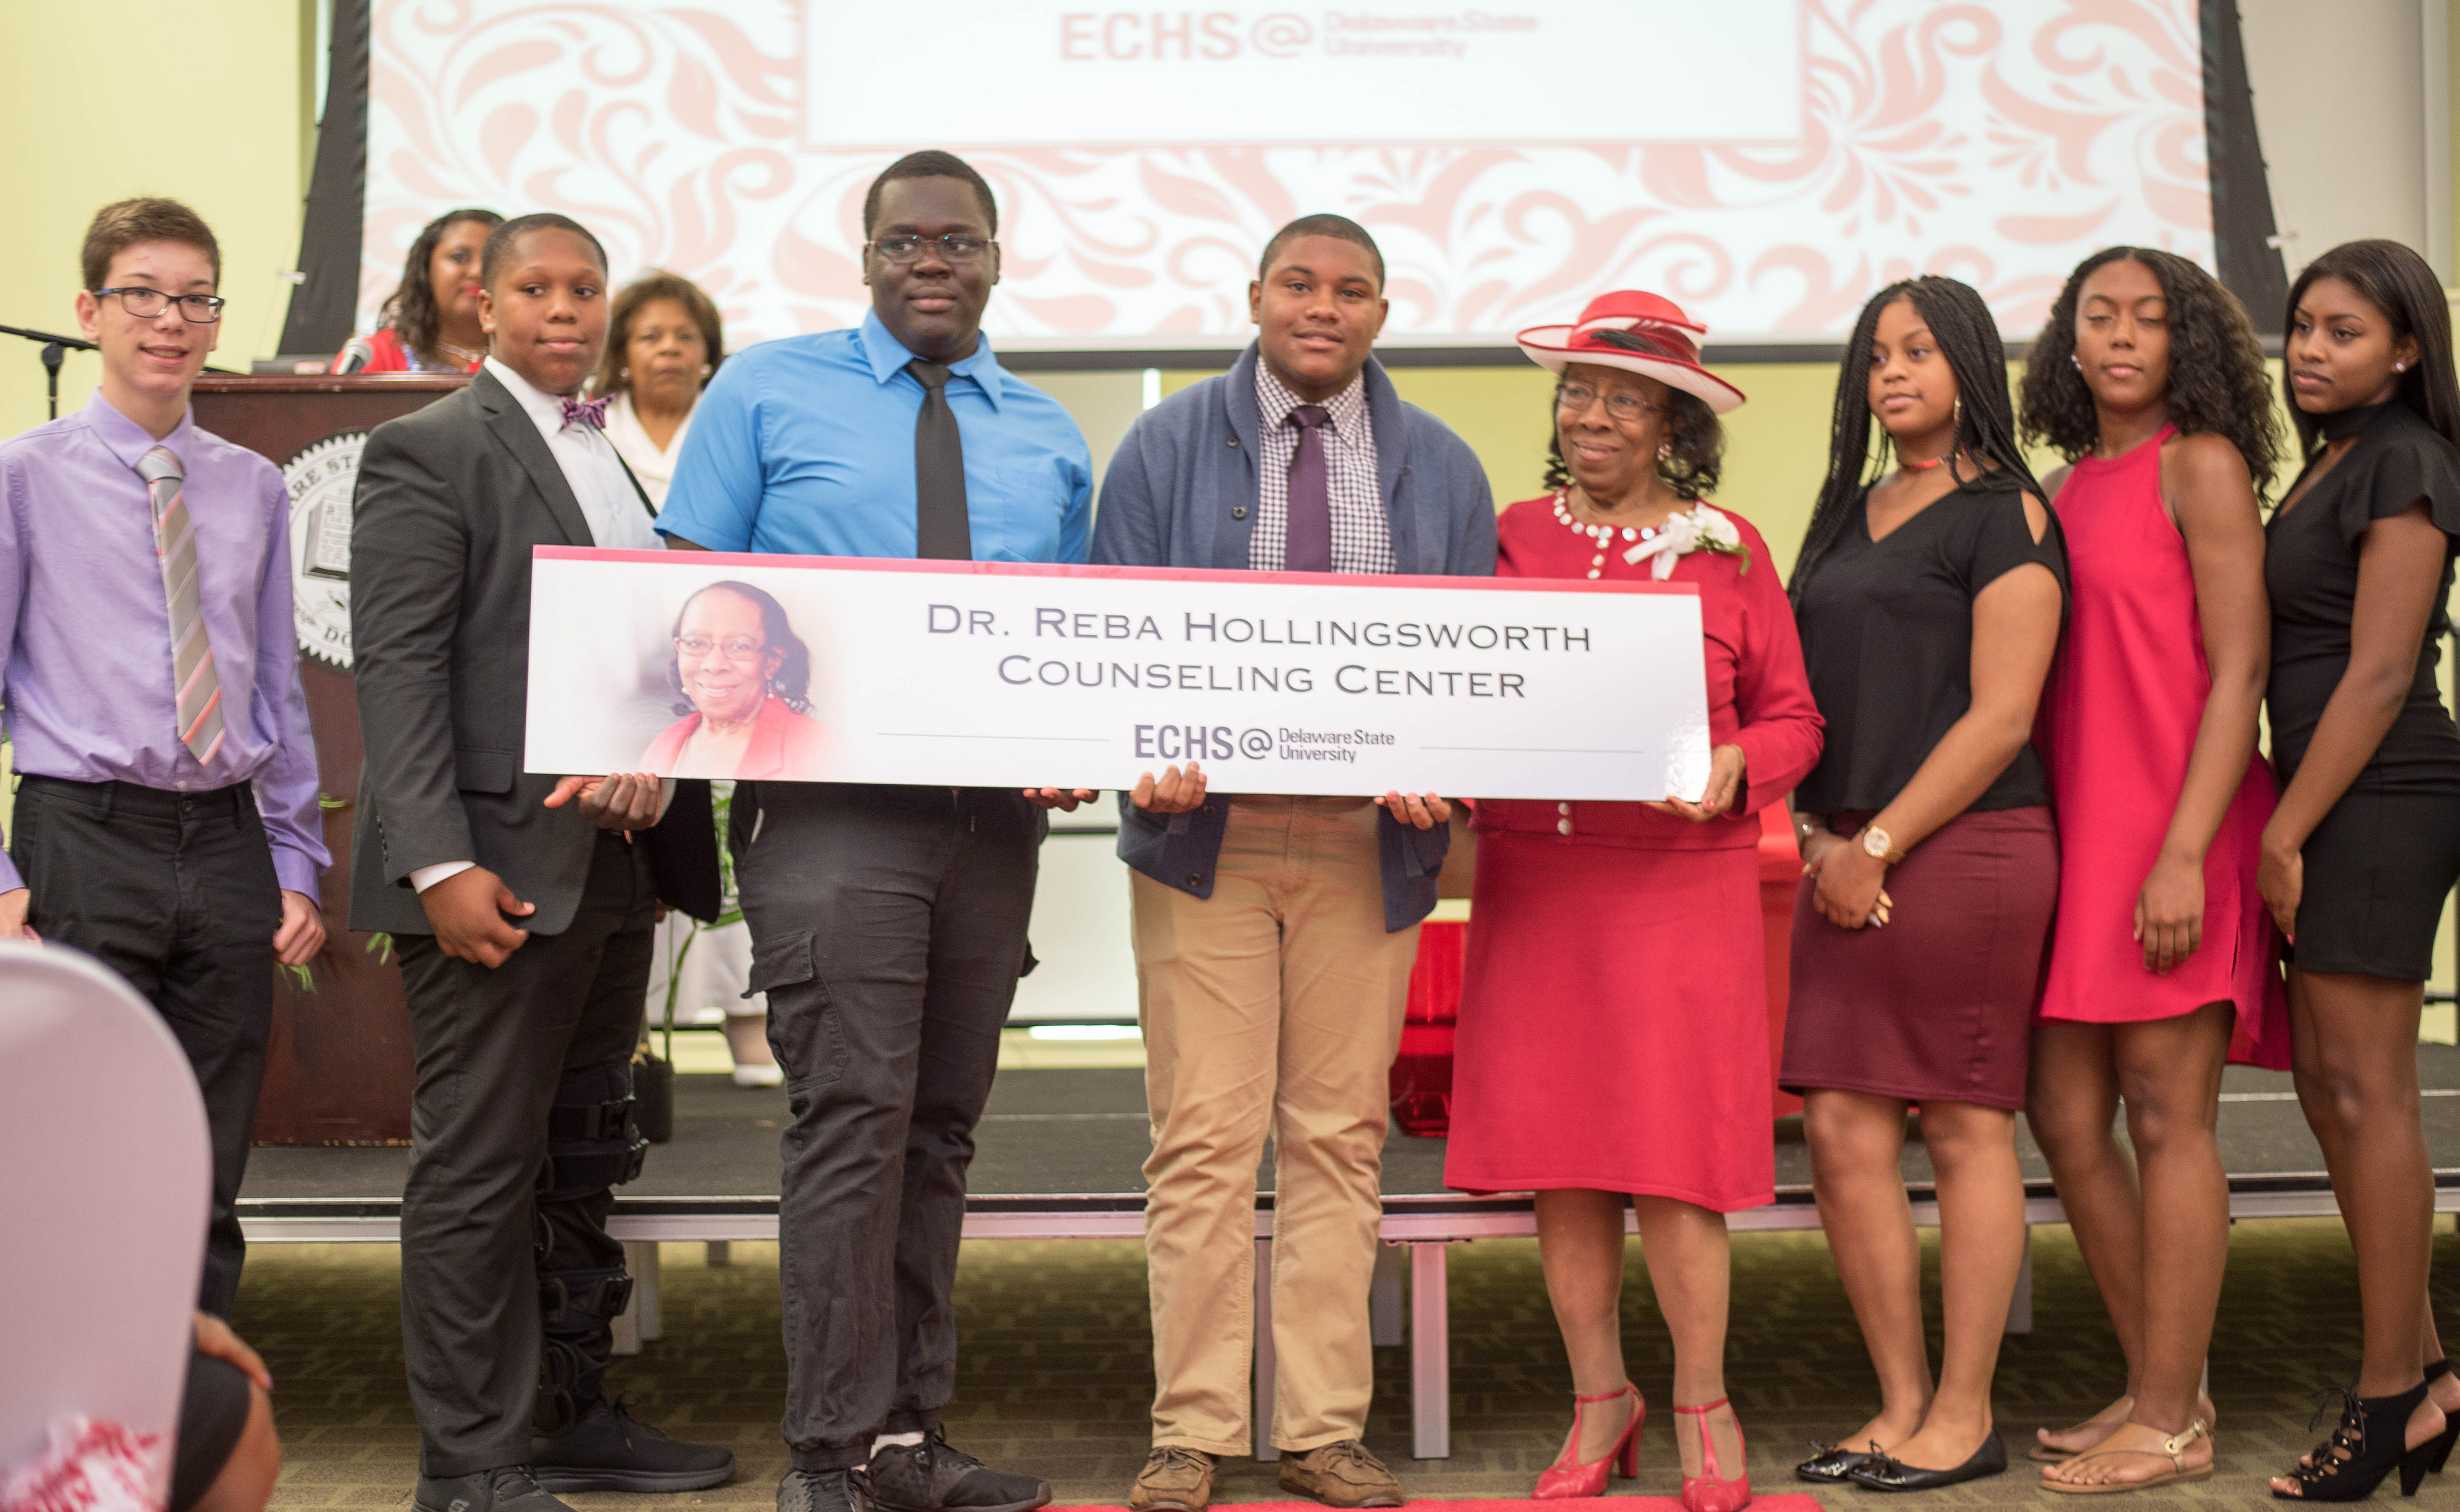 Dr. Reba Hollingsworth (in the red hat on the right side of the sign) is joined by students of the DSU Early College High School, as its counseling center is named after her.